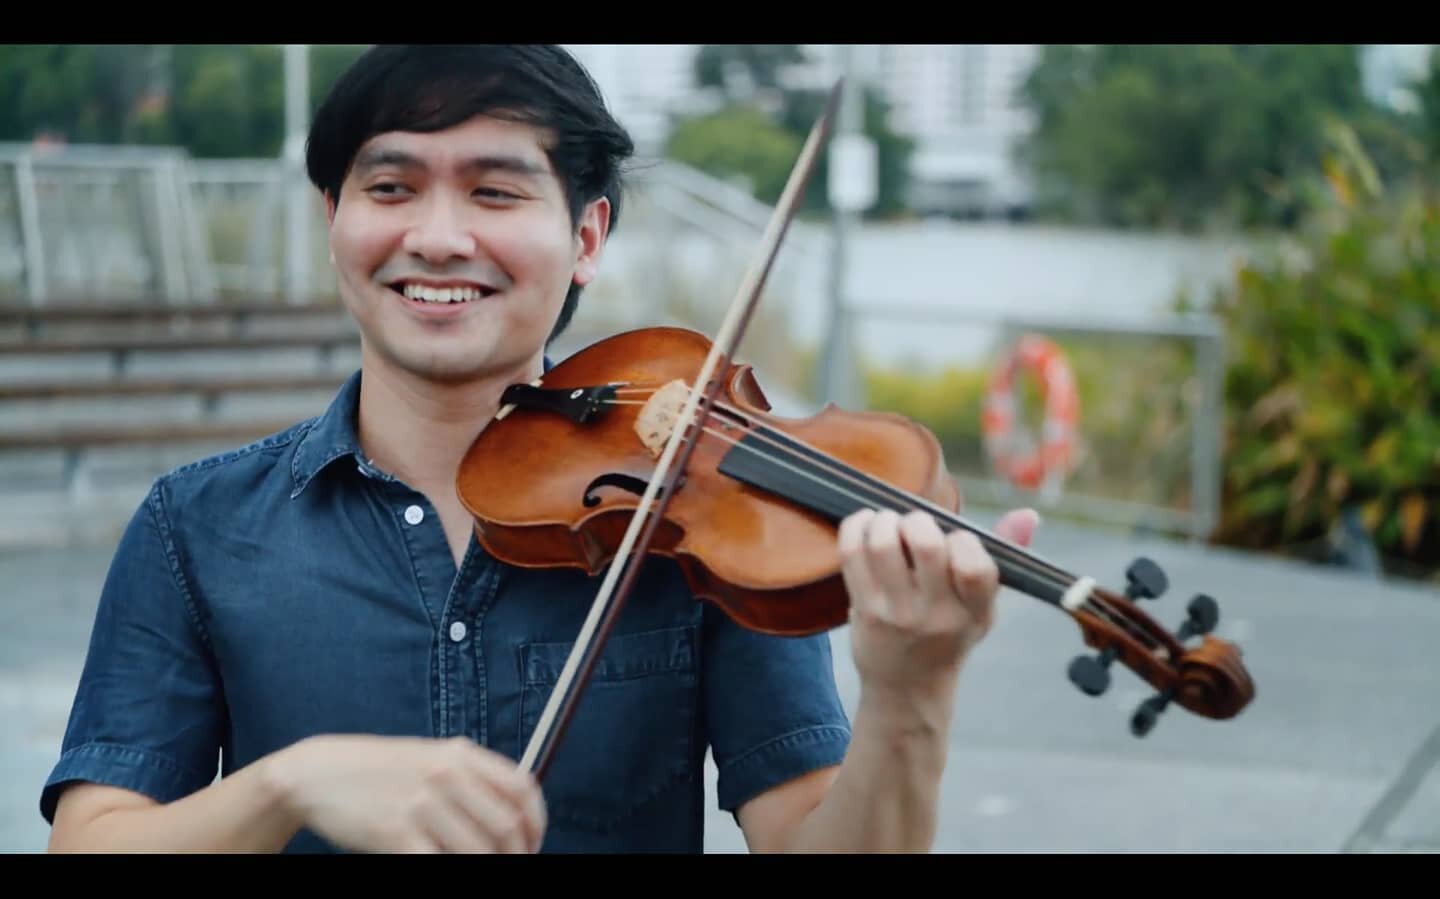 Don't miss our Pachelbel MV dropping at 8pm Singapore time tonight!! 😄
#reddotbaroque&nbsp;#baroque&nbsp;#baroquemusic&nbsp;#pachelbel&nbsp;#canon&nbsp;#pachelbelcanon&nbsp;#pachelbelscanon&nbsp;#canonind&nbsp;#discoversingapore&nbsp;#SingapoRedisco